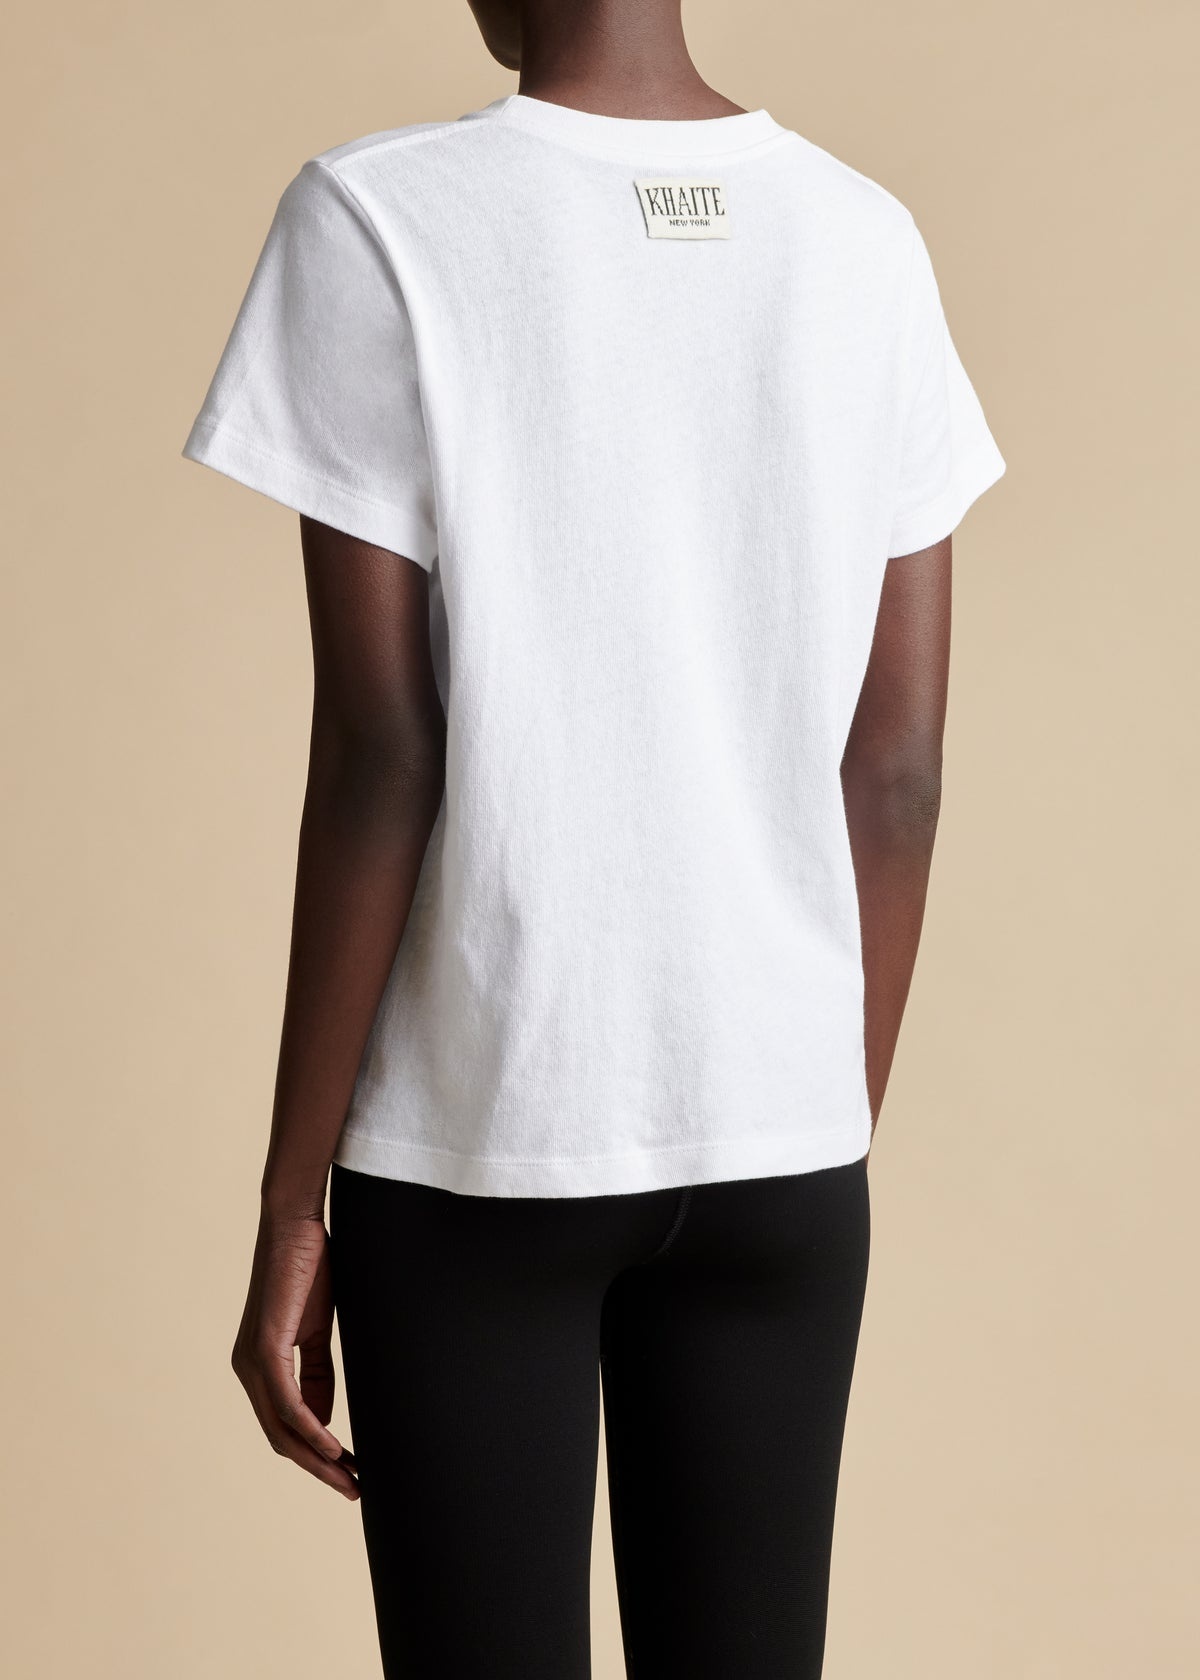 The Emmylou T-Shirt in White - 3